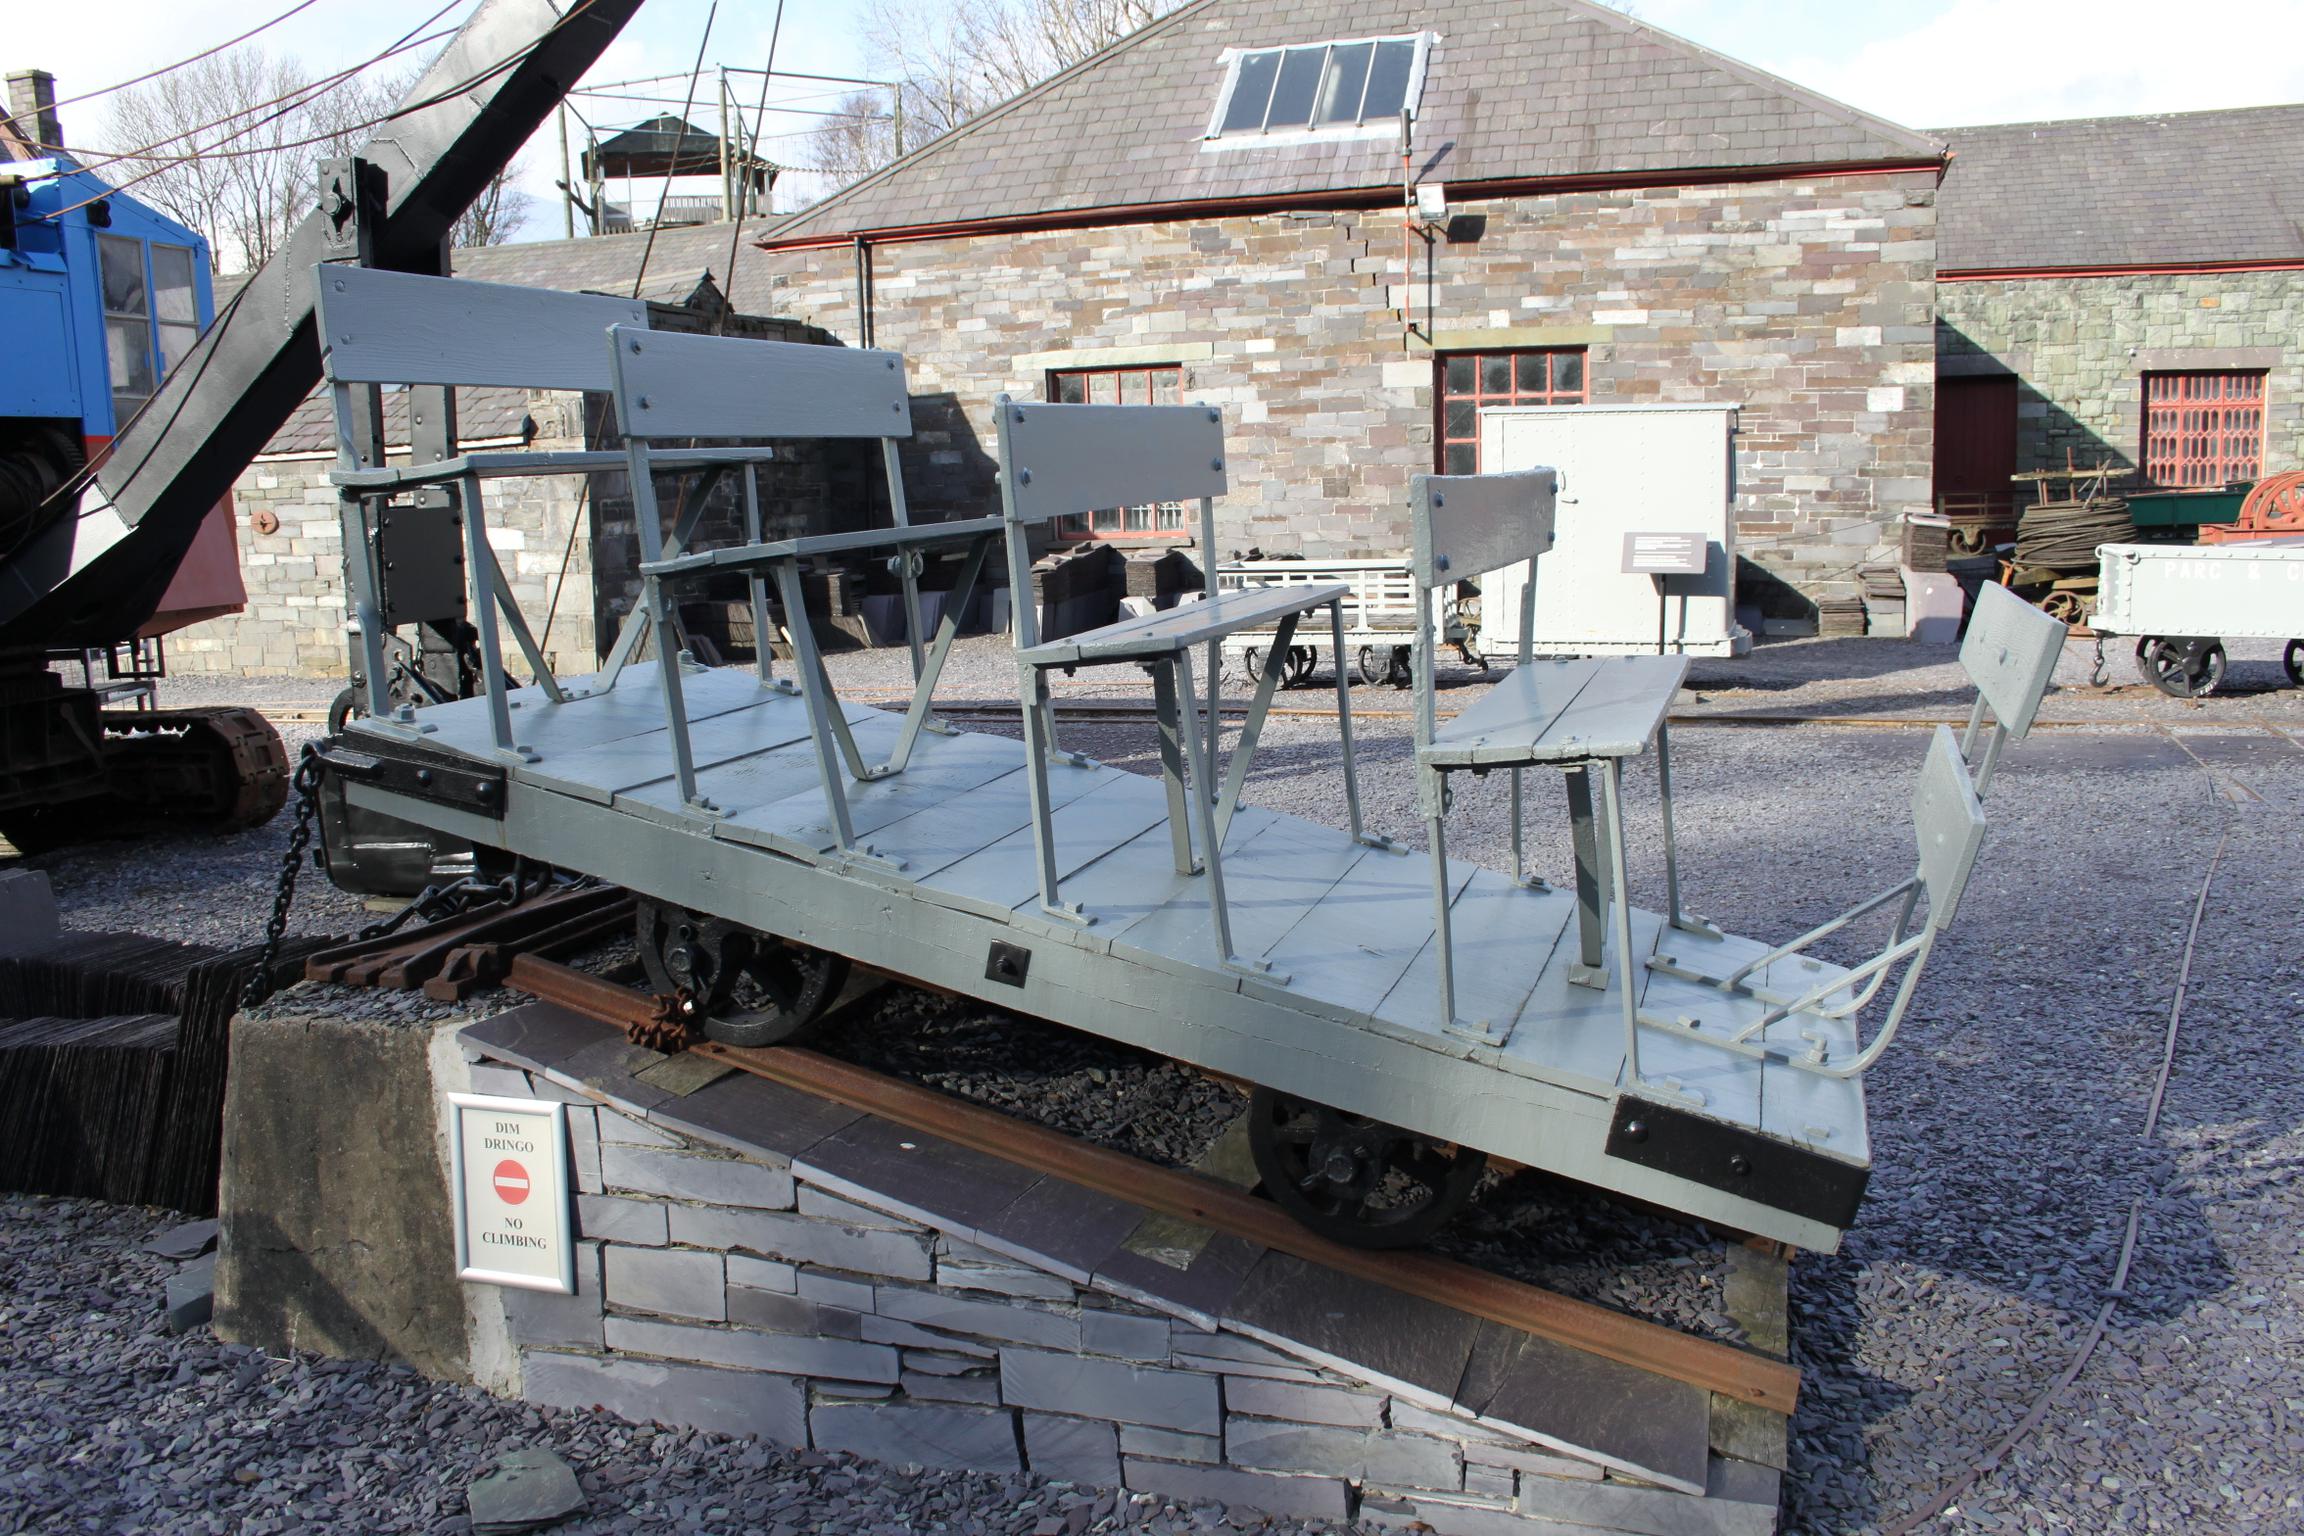 Workmens' wagon used on the inclines